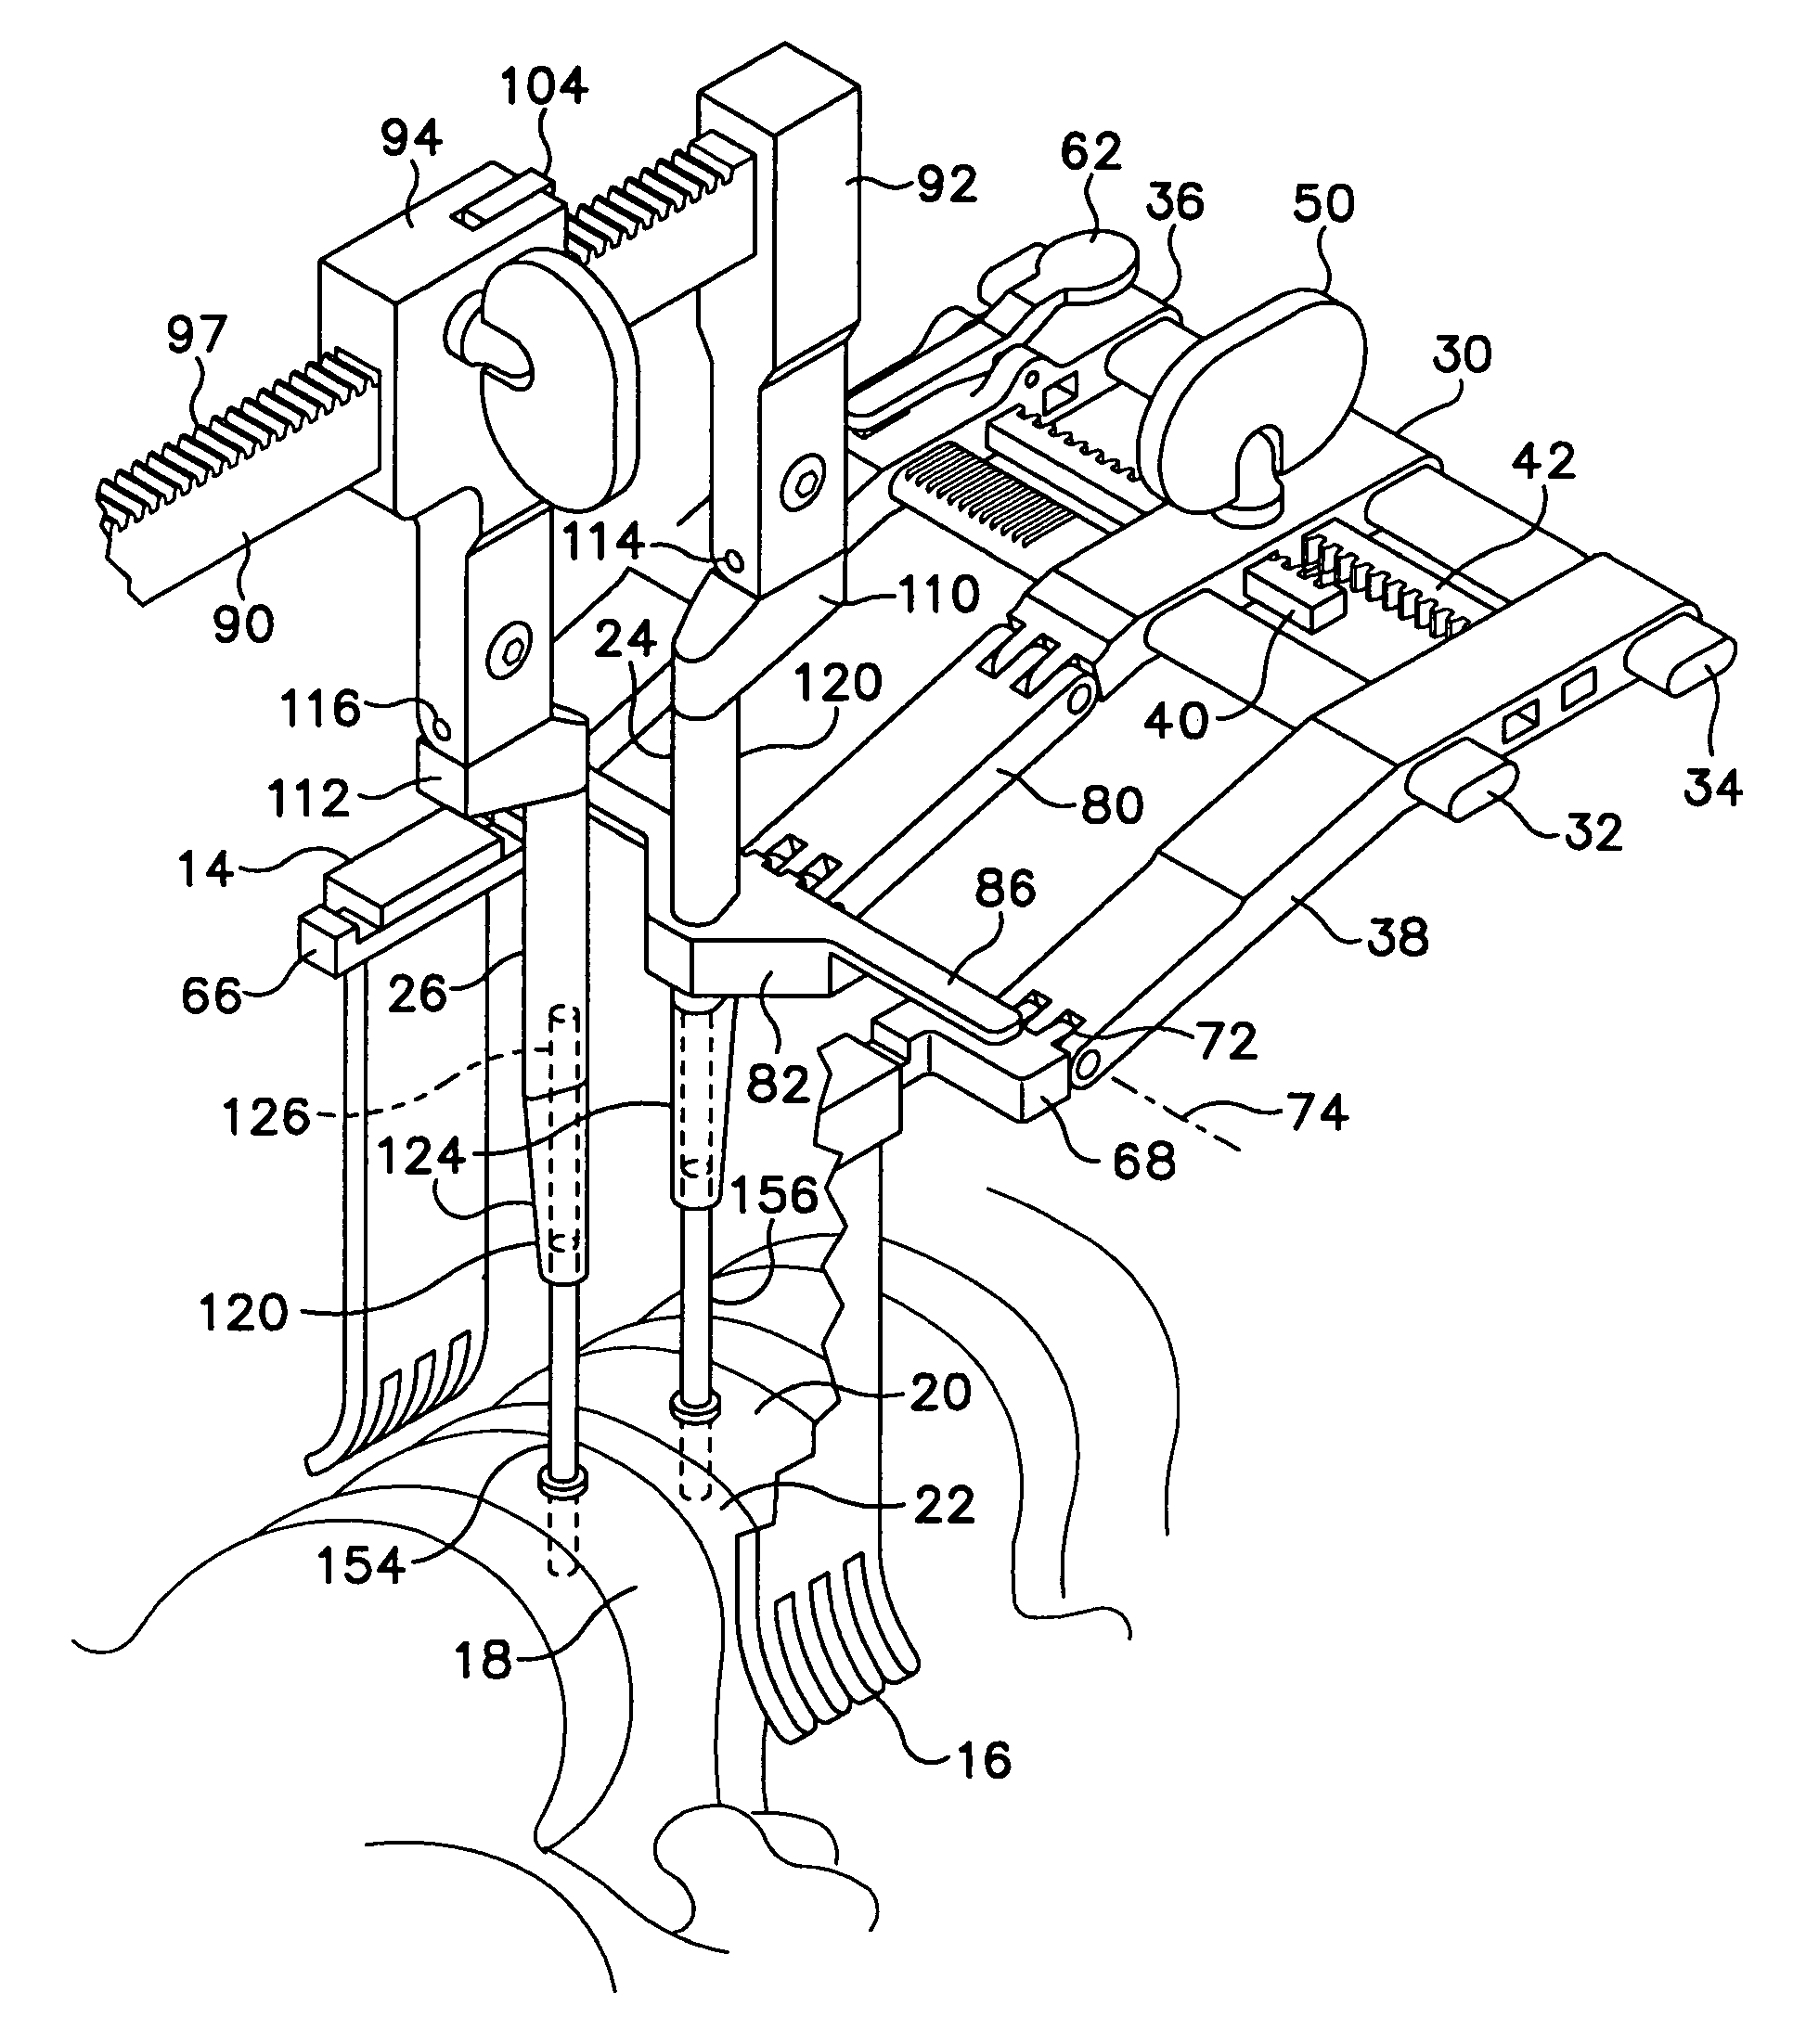 Retractor and distractor system for use in anterior cervical disc surgery